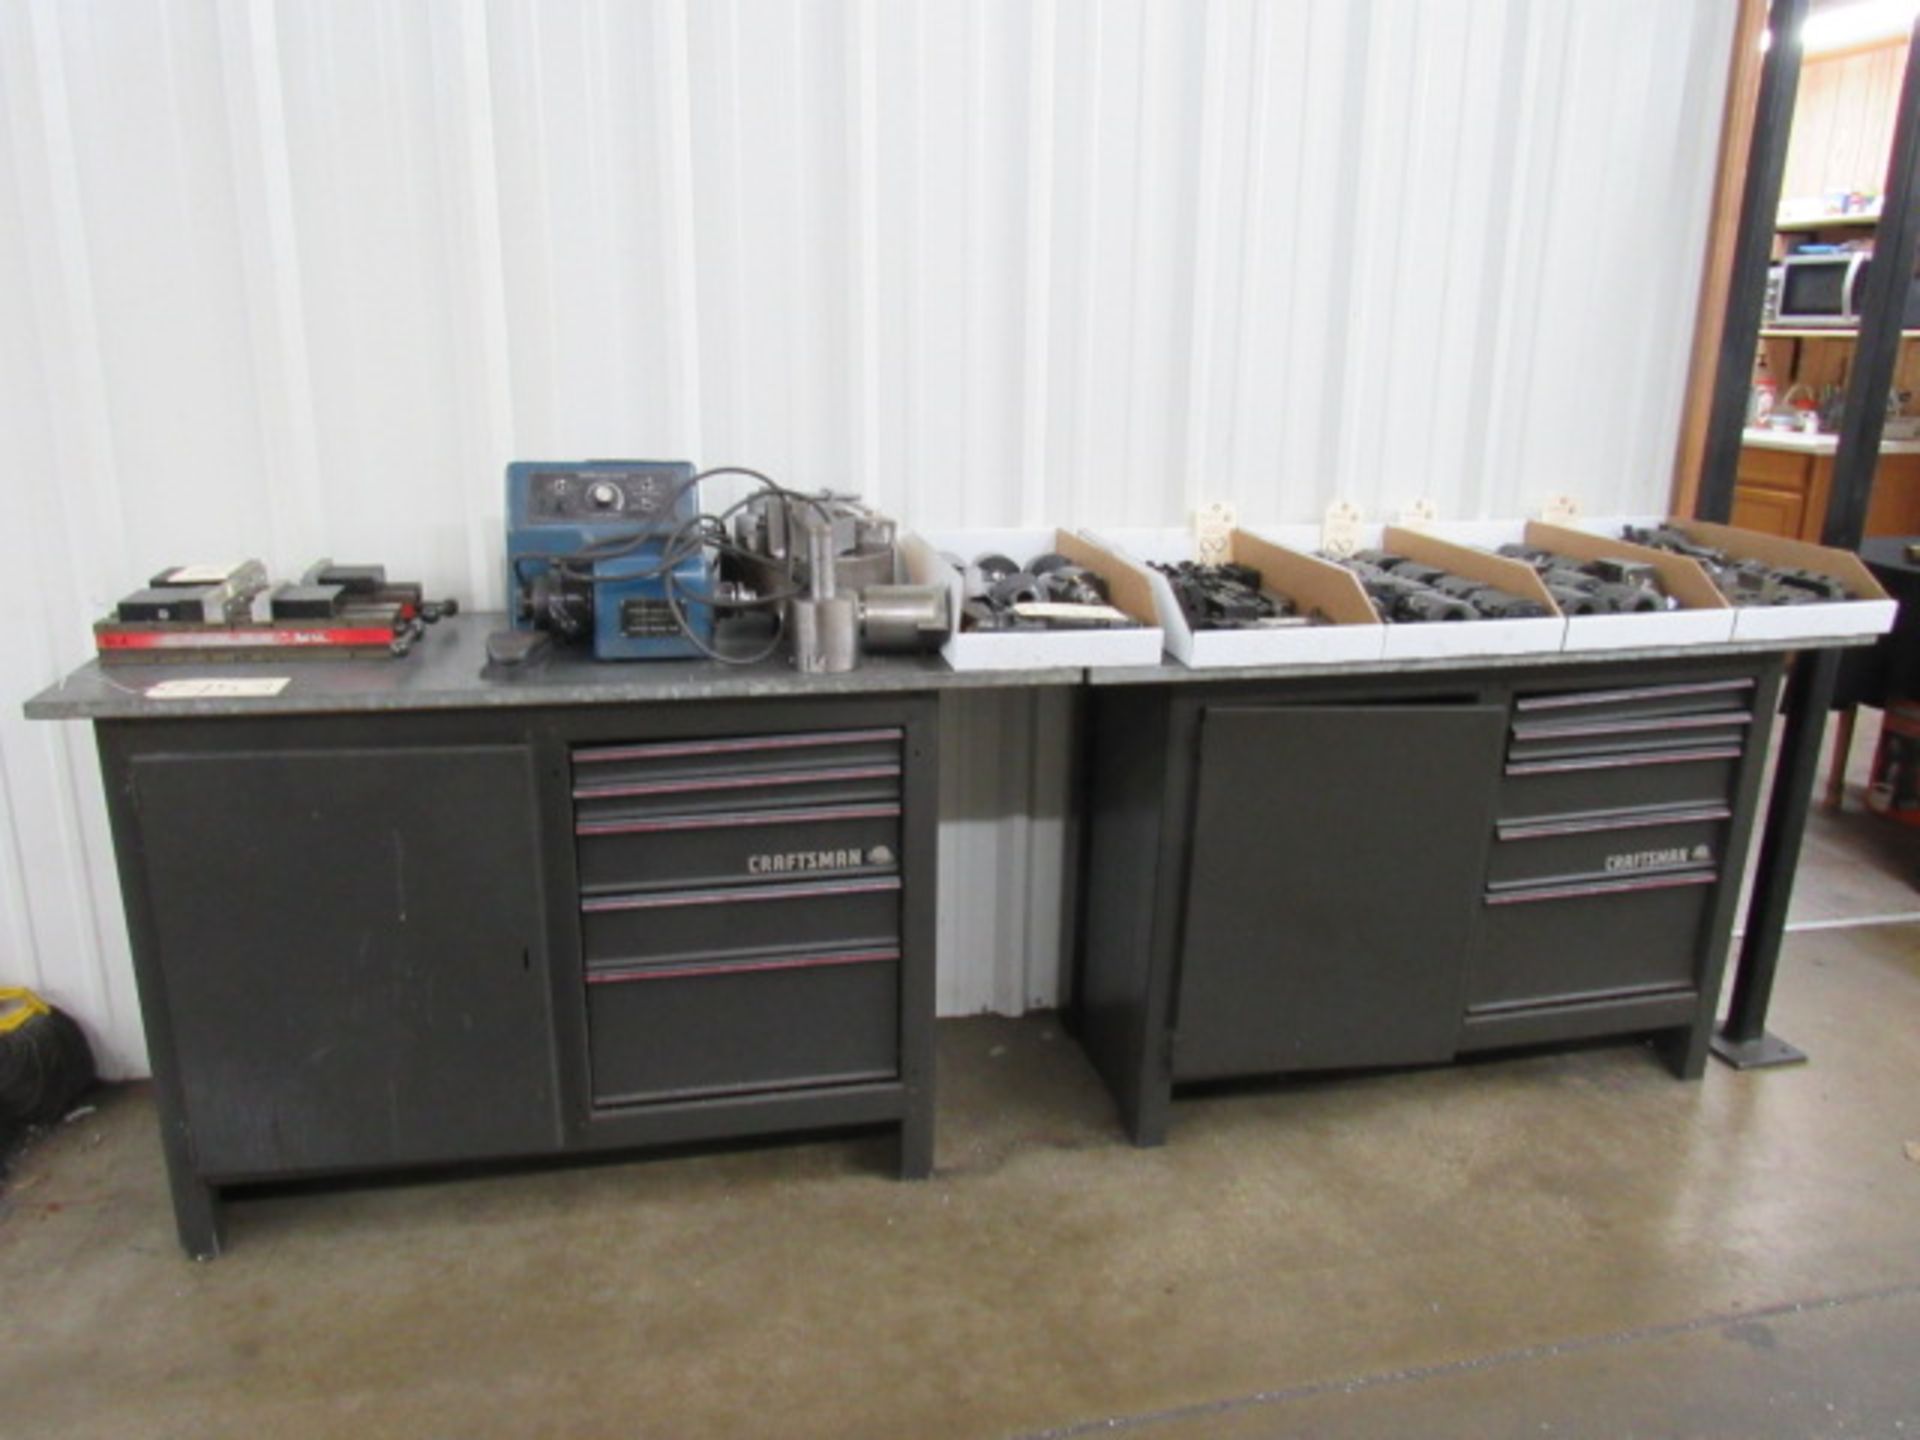 (4) Craftsman Workbenches (See Pictures)